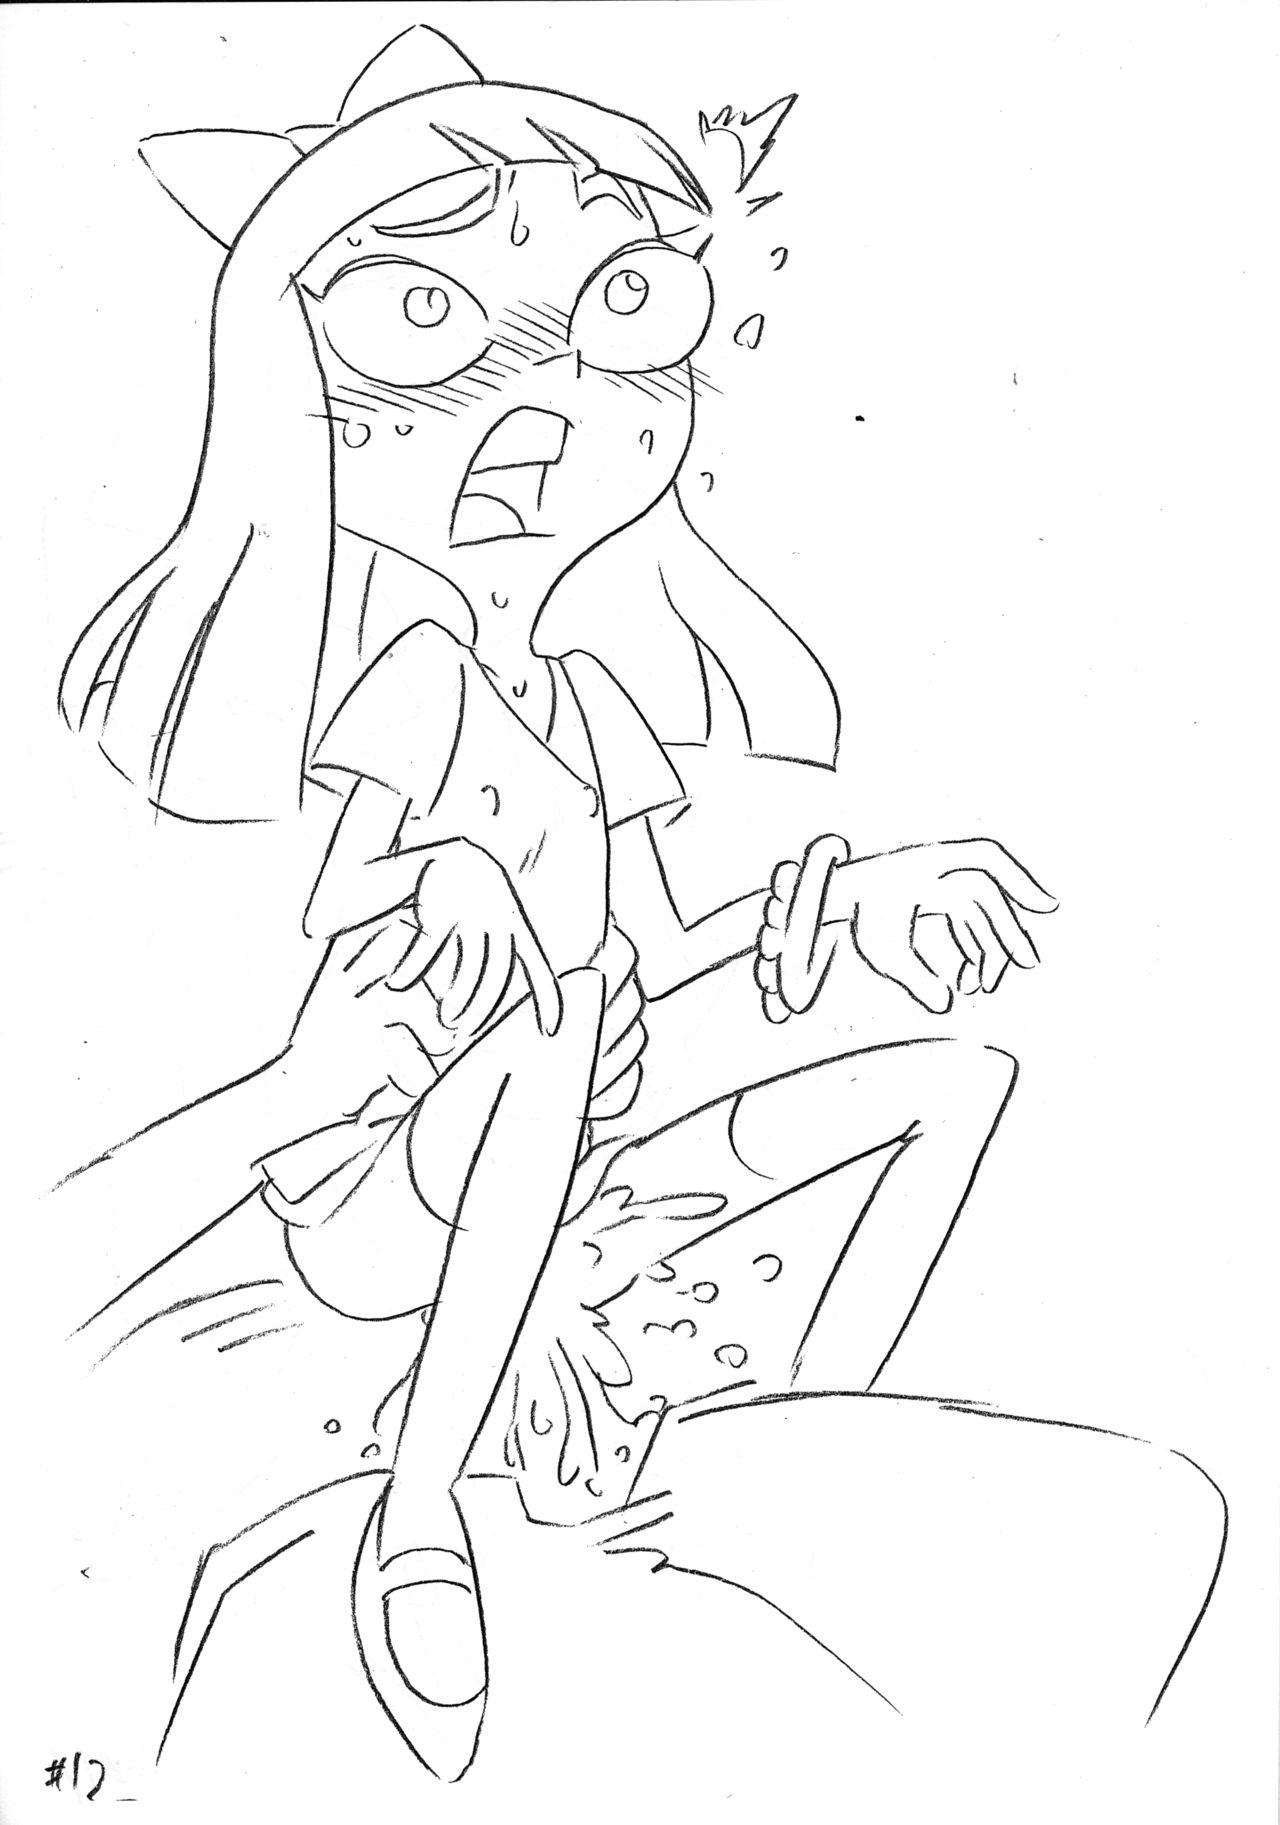 Ball Licking Psychosomatic Counterfeit Ex: Stacy in Early Age - Phineas and ferb Gay Friend - Page 11